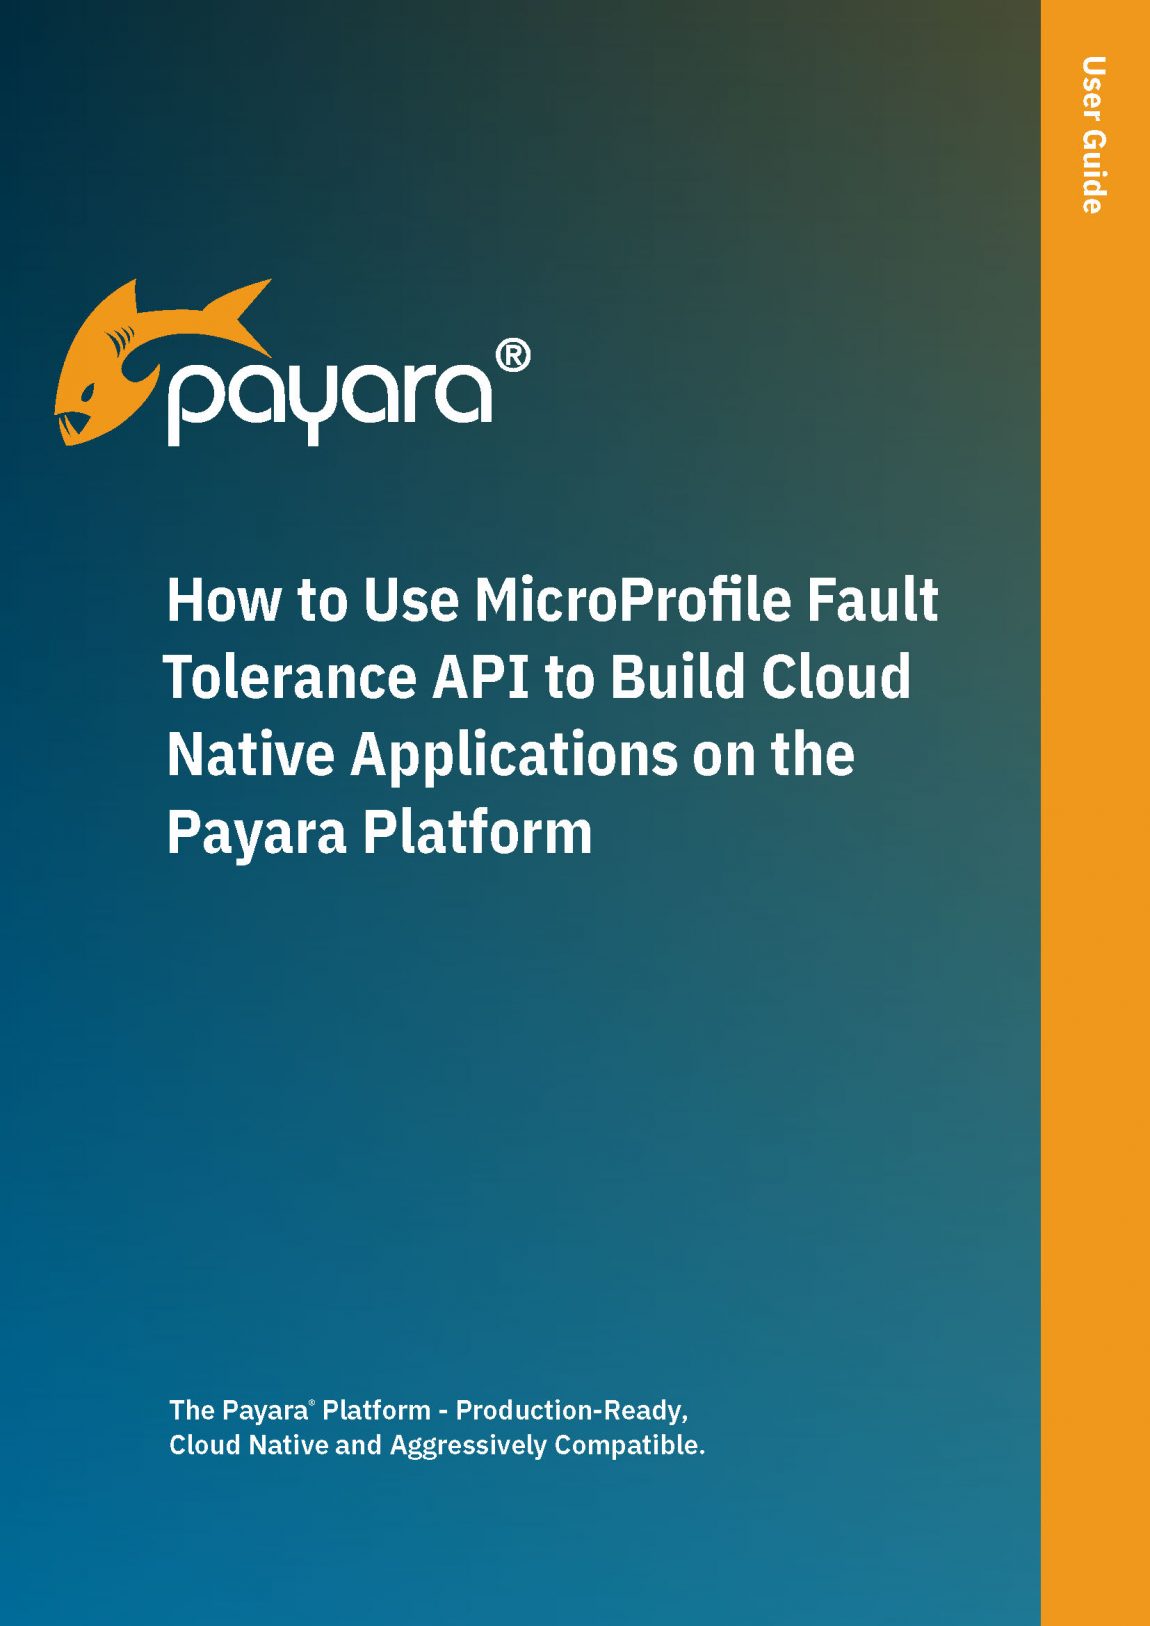 How to Use MicroProfile Fault Tolerance API to Build Cloud Native Applications on the Payara Platform